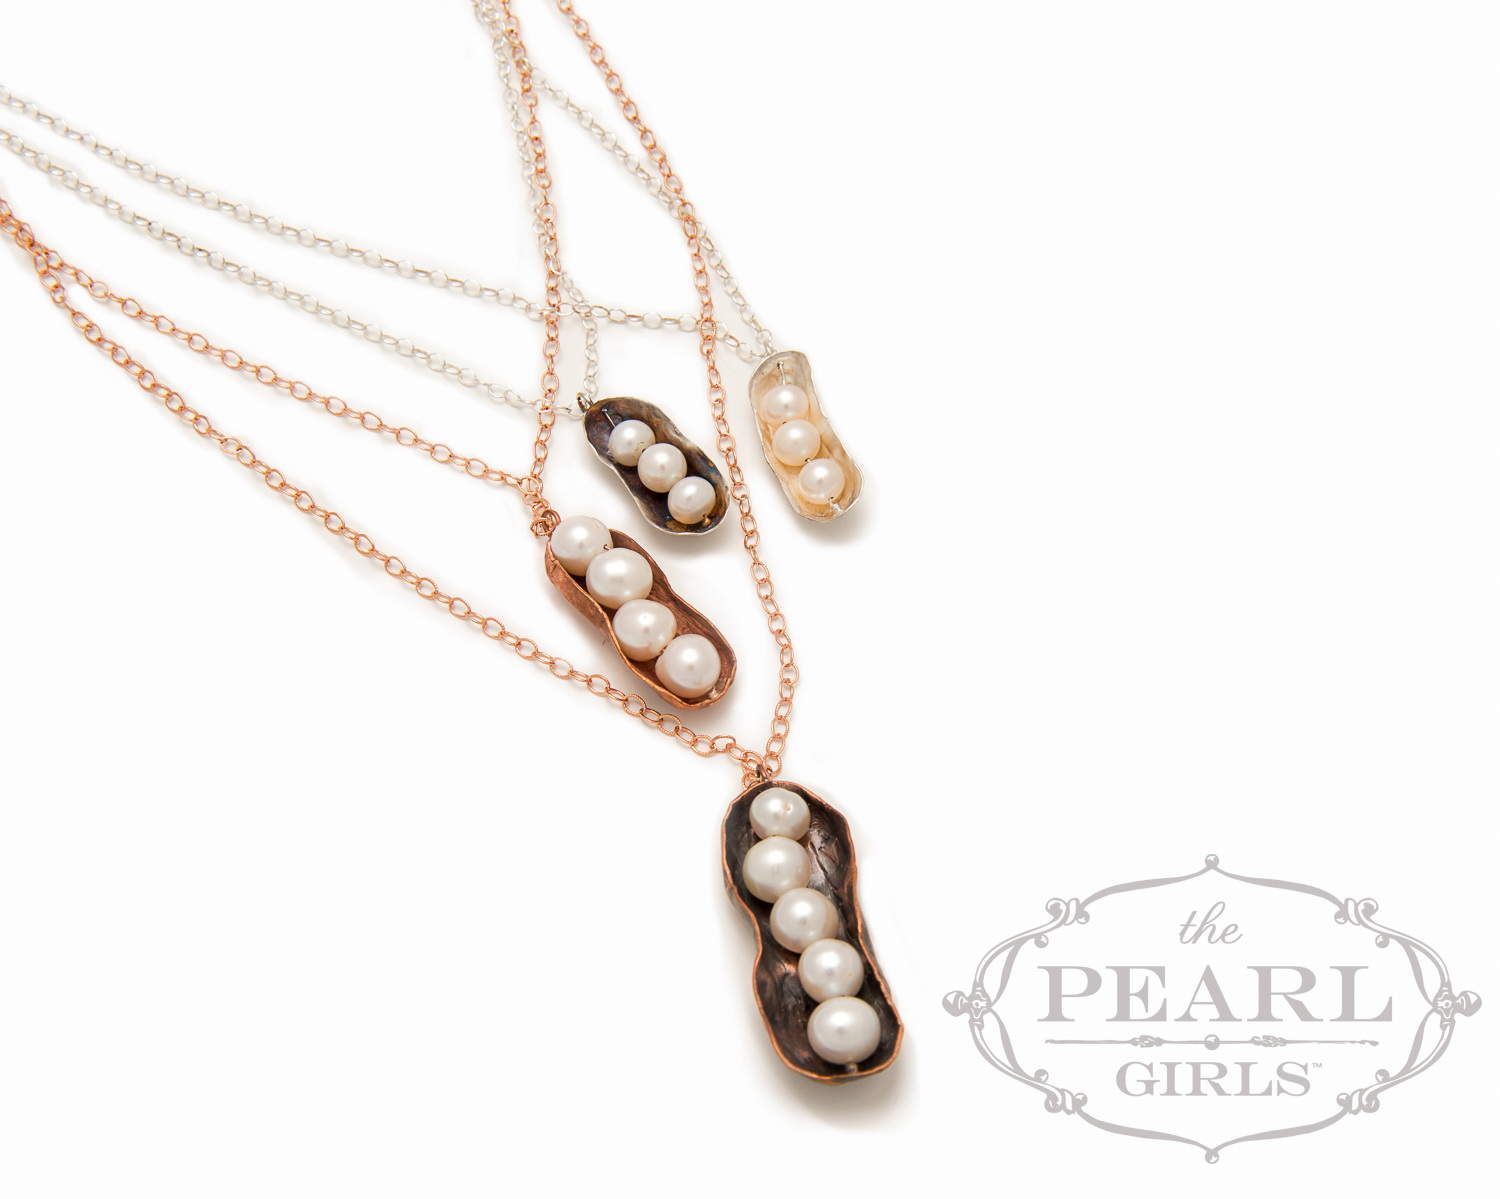 Peanut Pearls Necklace by Sylvia Dawe (Sterling Silver Peanut, Large Off-Round 9mm Pearls)